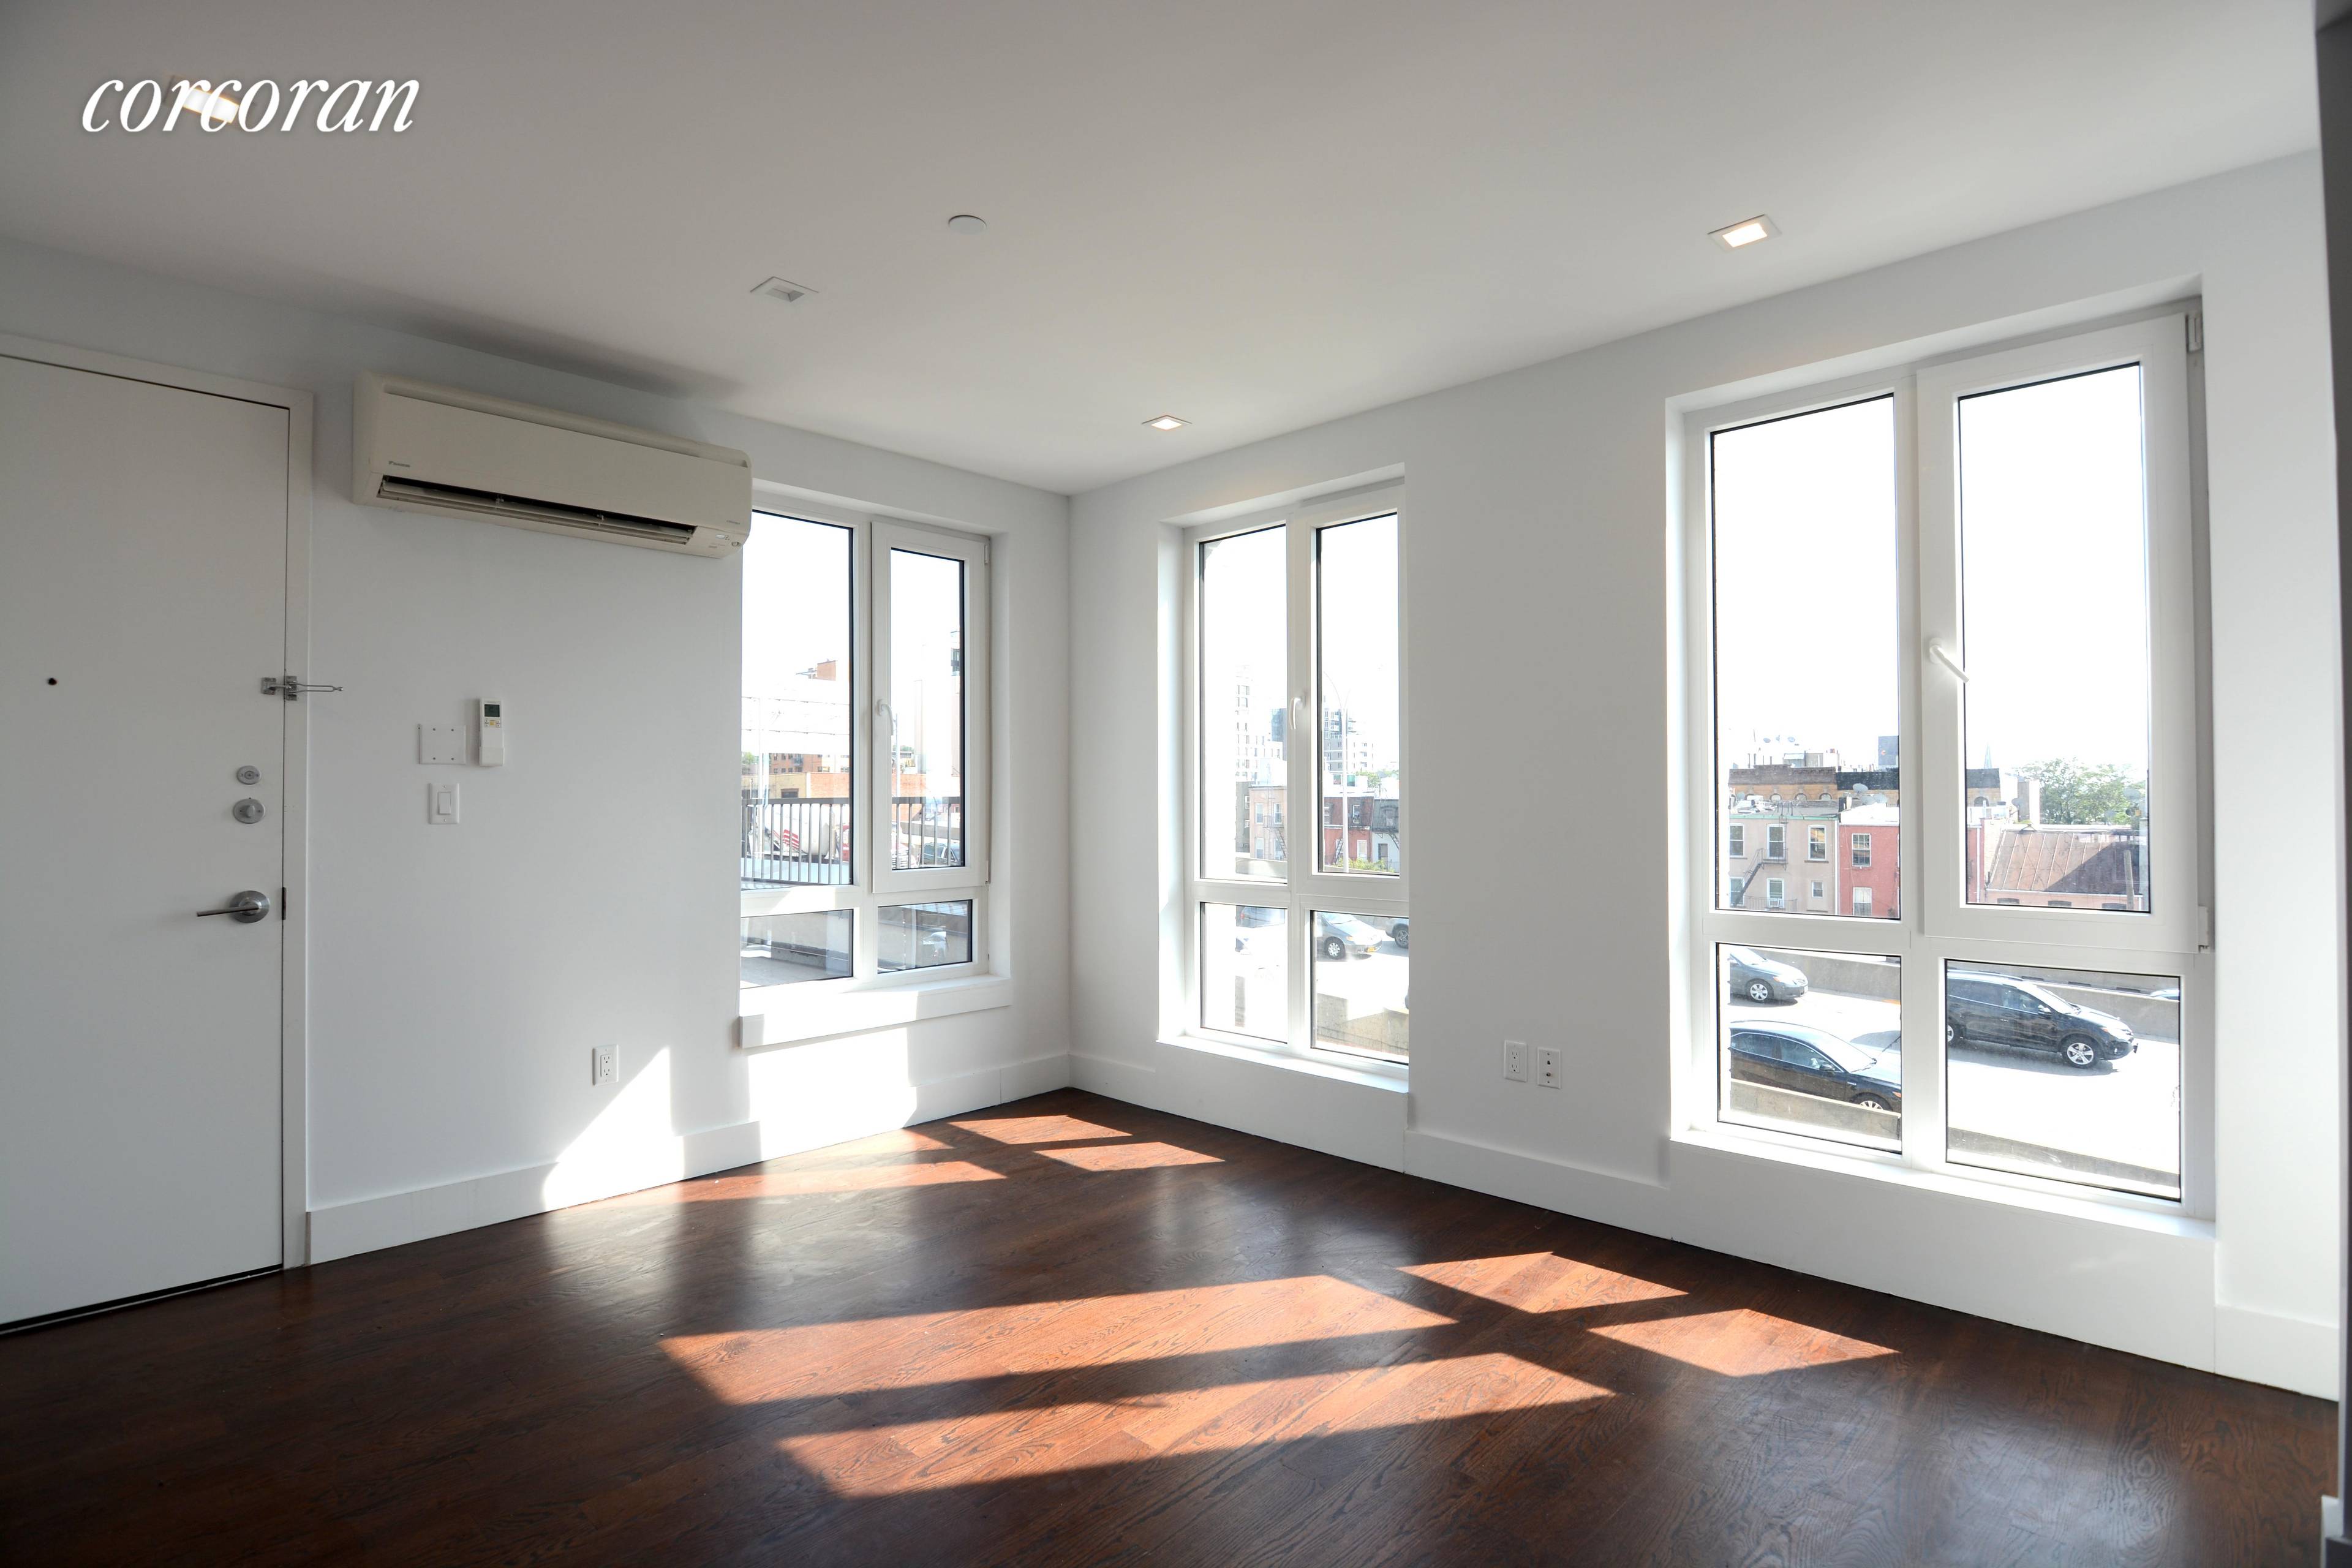 Modern sleek 3 Bedroom 2 Bathroom ApartmentShared Outdoor Space and Laundry In Building.